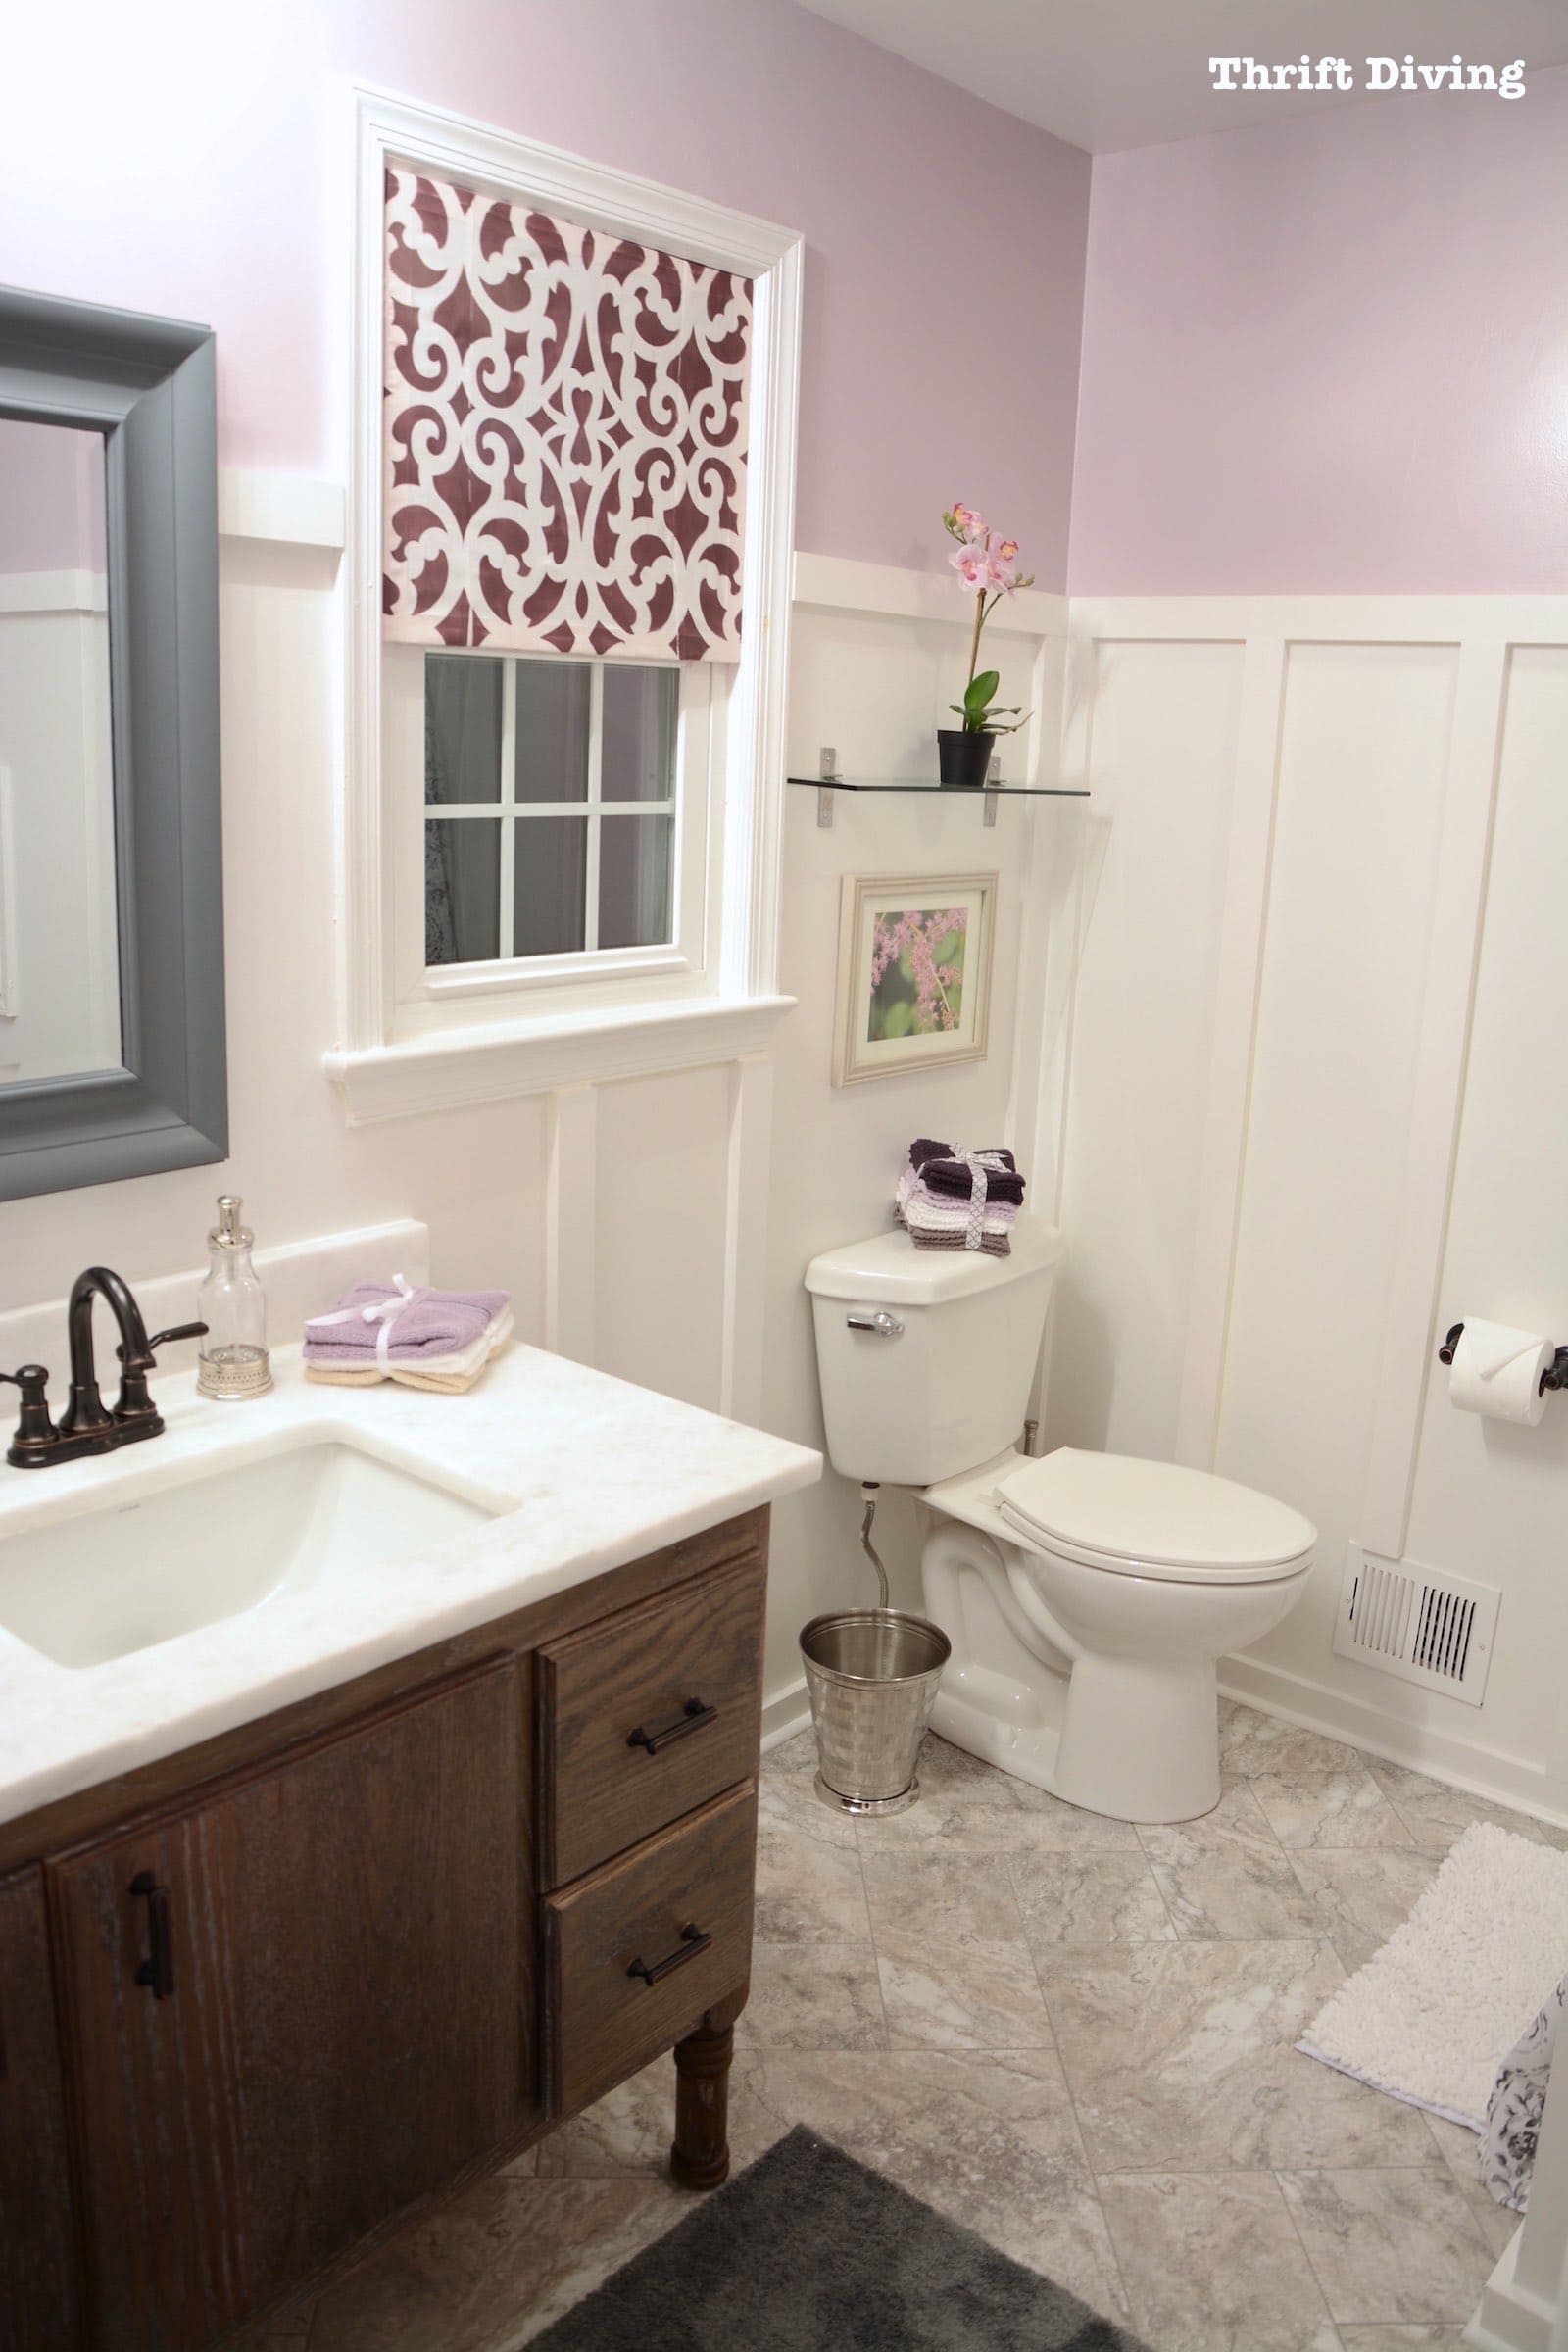 See how this master bathroom makeover was done with new flooring, a new DIY bathroom vanity built from scratch, a new DIY window privacy screen, new toilet, and painted shower! - Thrift Diving